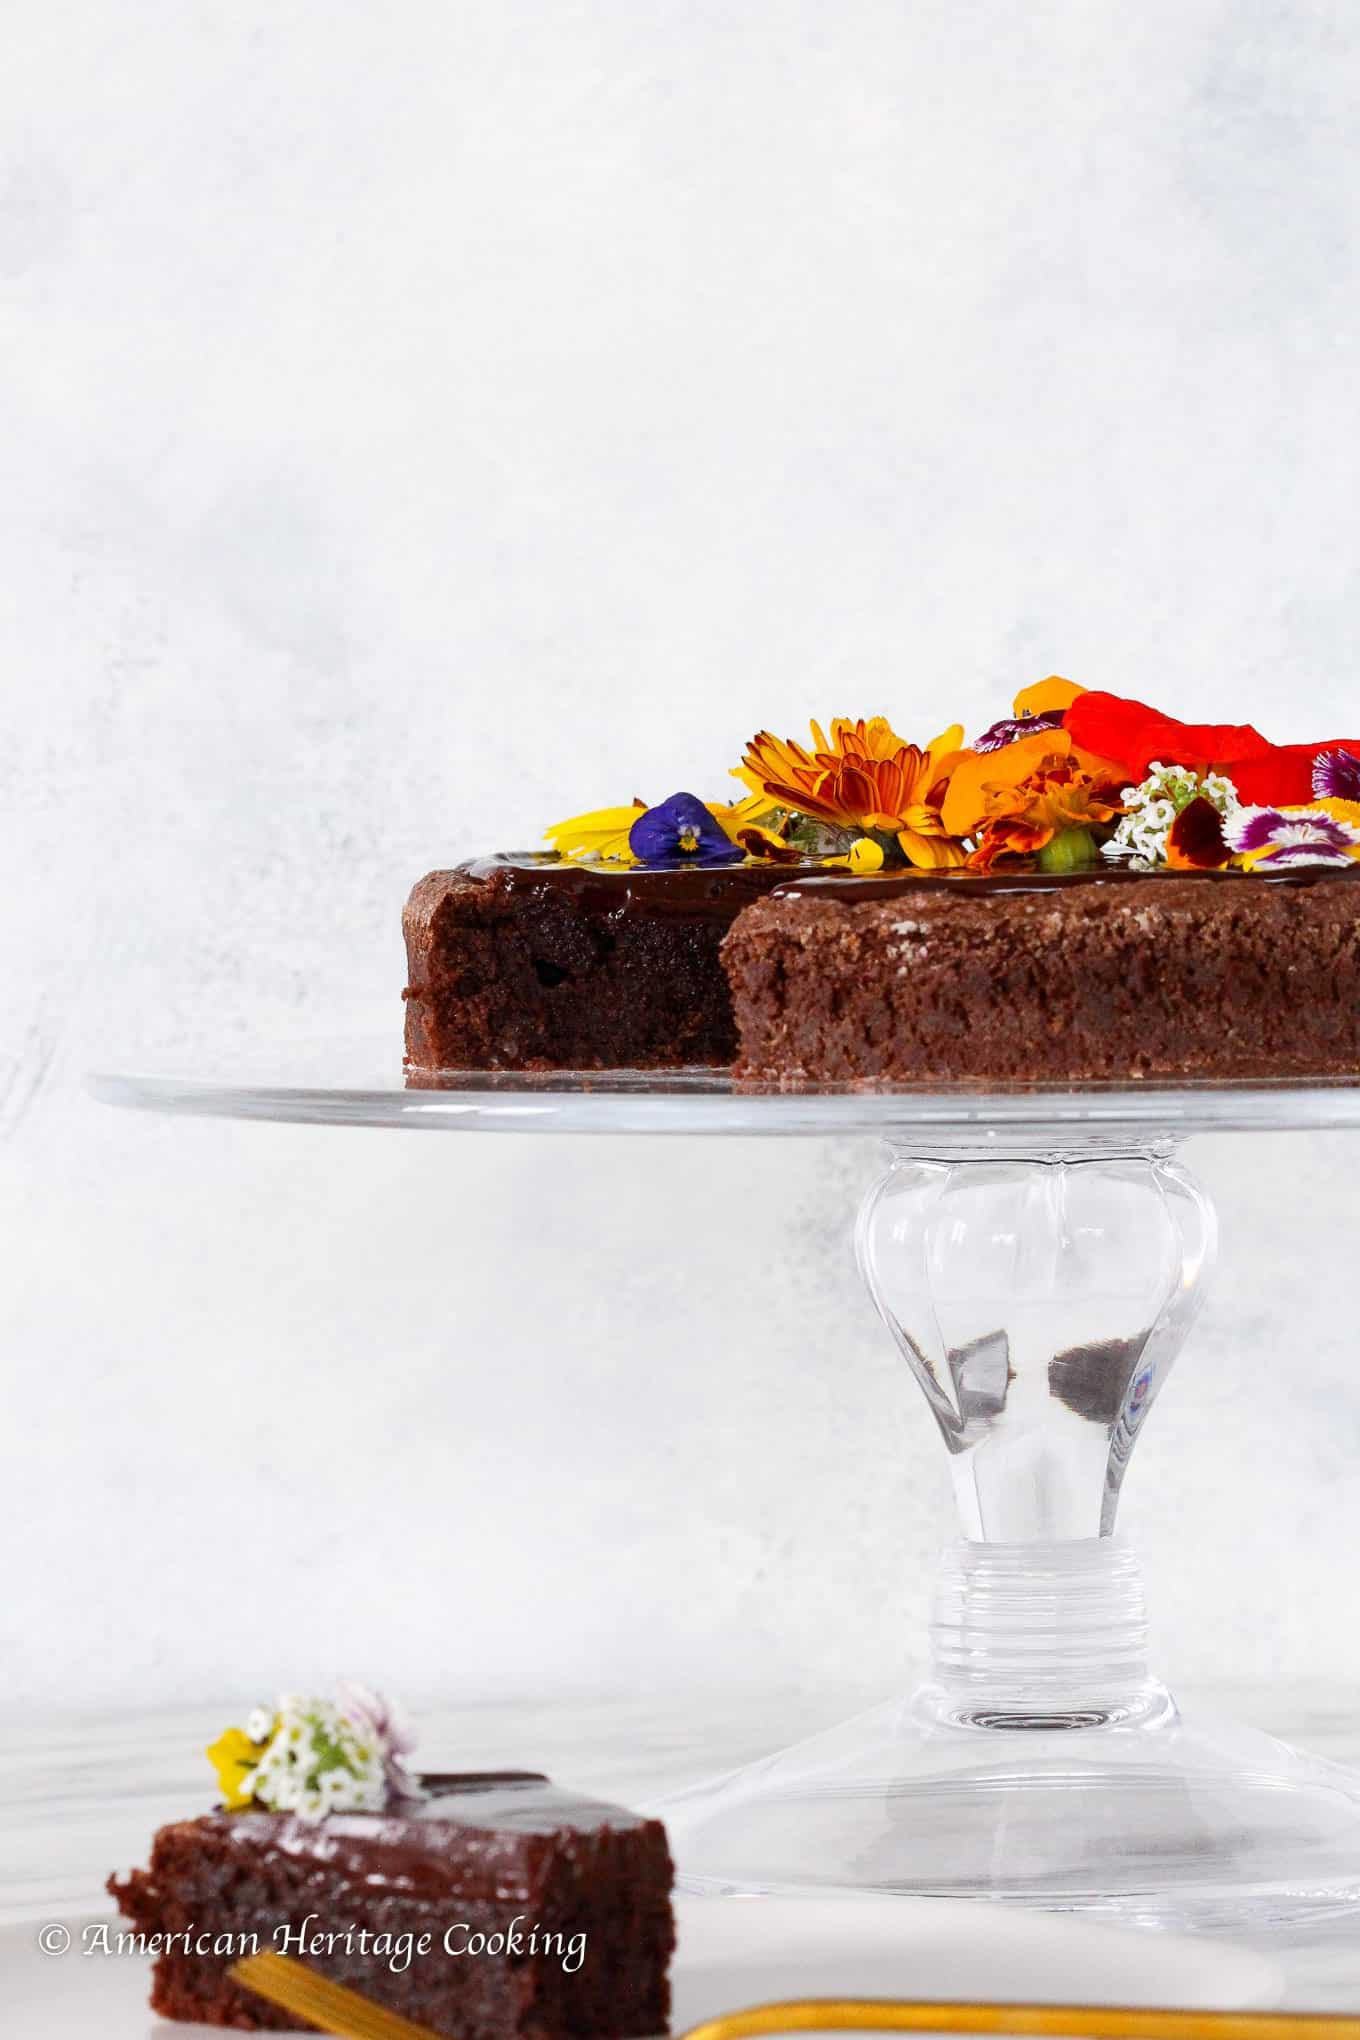 Hazelnut Flourless Chocolate Cake on a clear cake stand for Valentine's Day Desserts.